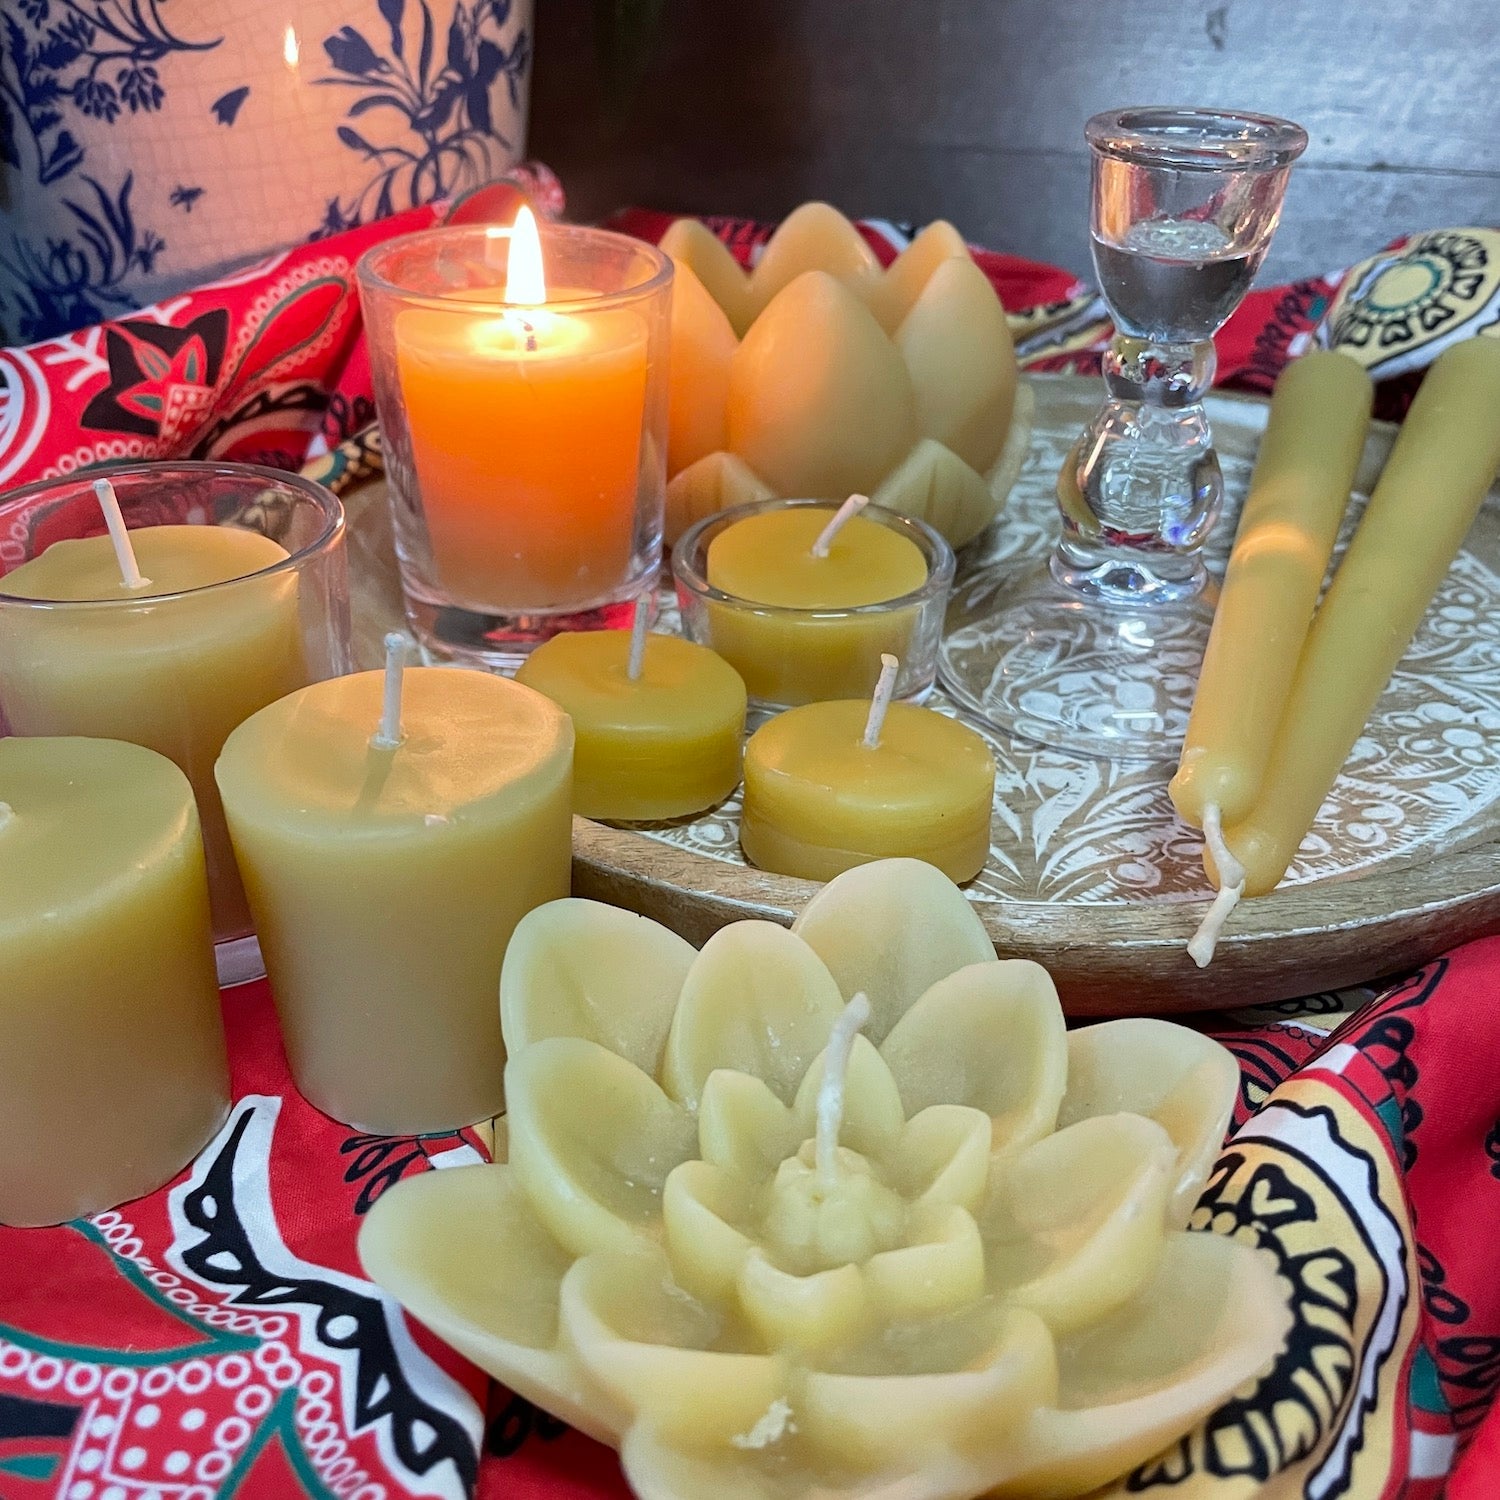 NEW Meditation beeswax candle collection- Made from 100% Australian Beeswax gift pack Happy Flame 